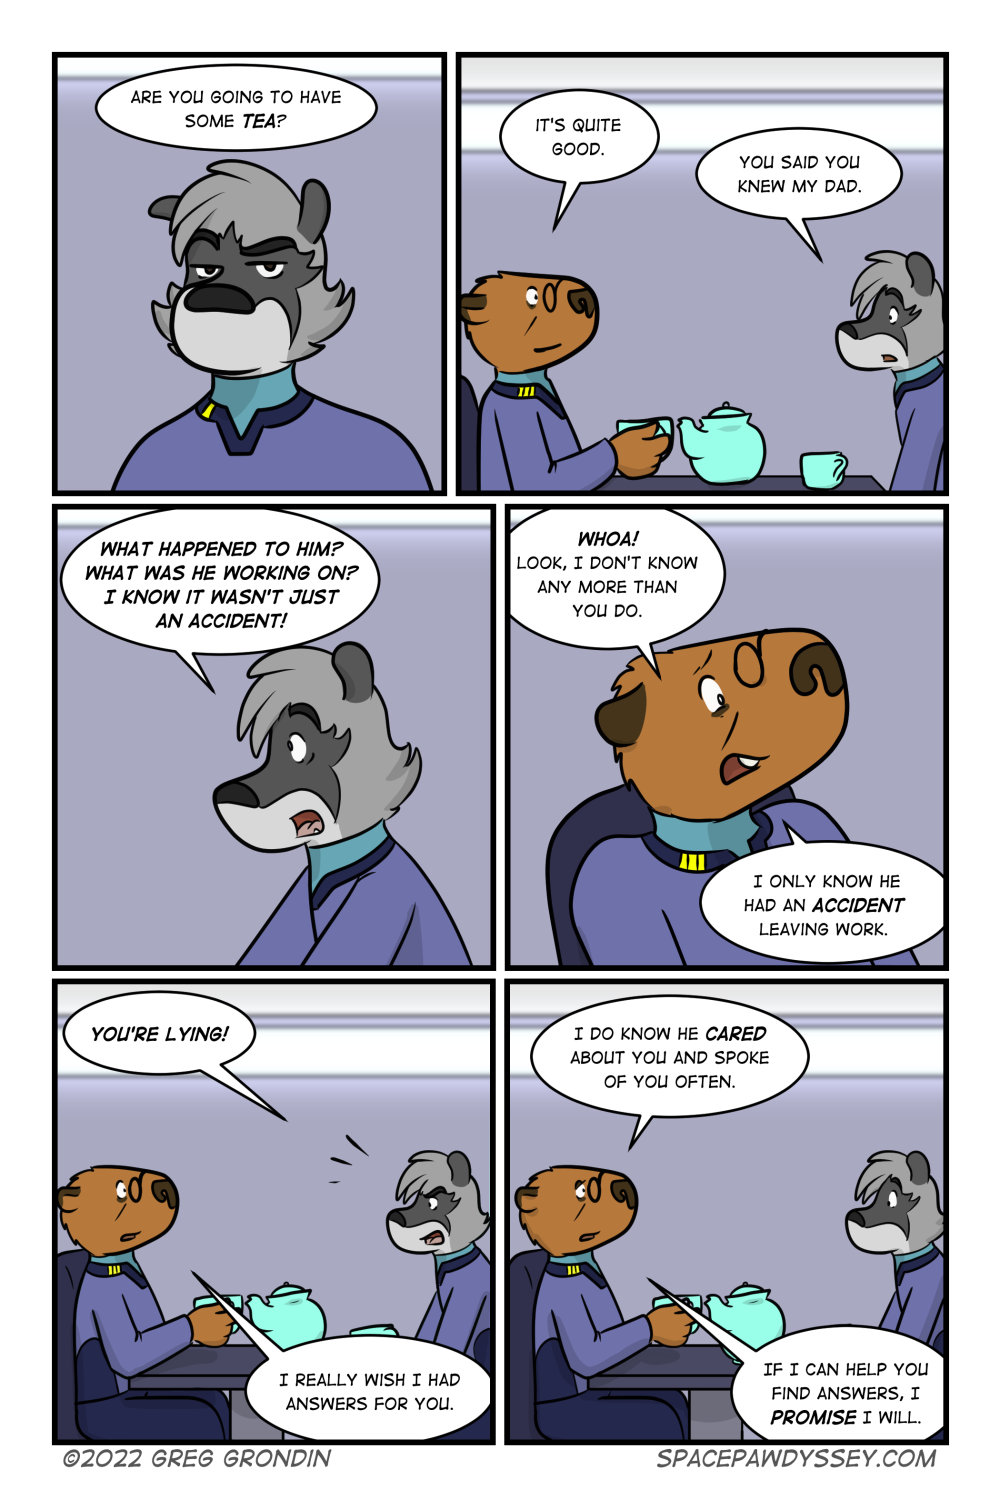 Space Pawdyssey #532